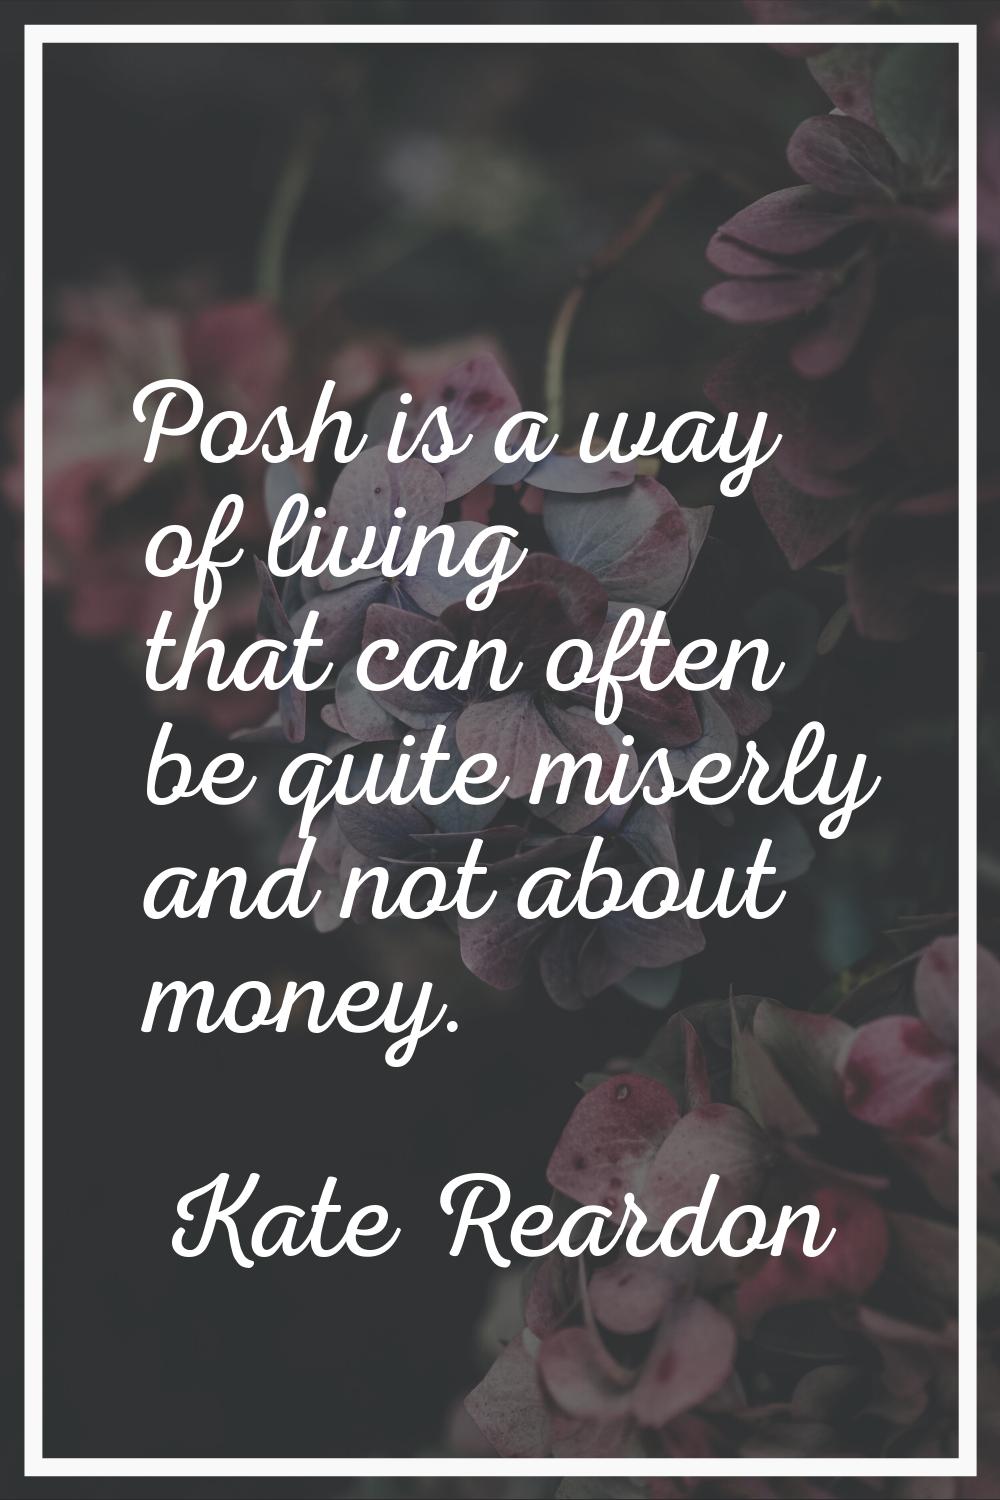 Posh is a way of living that can often be quite miserly and not about money.